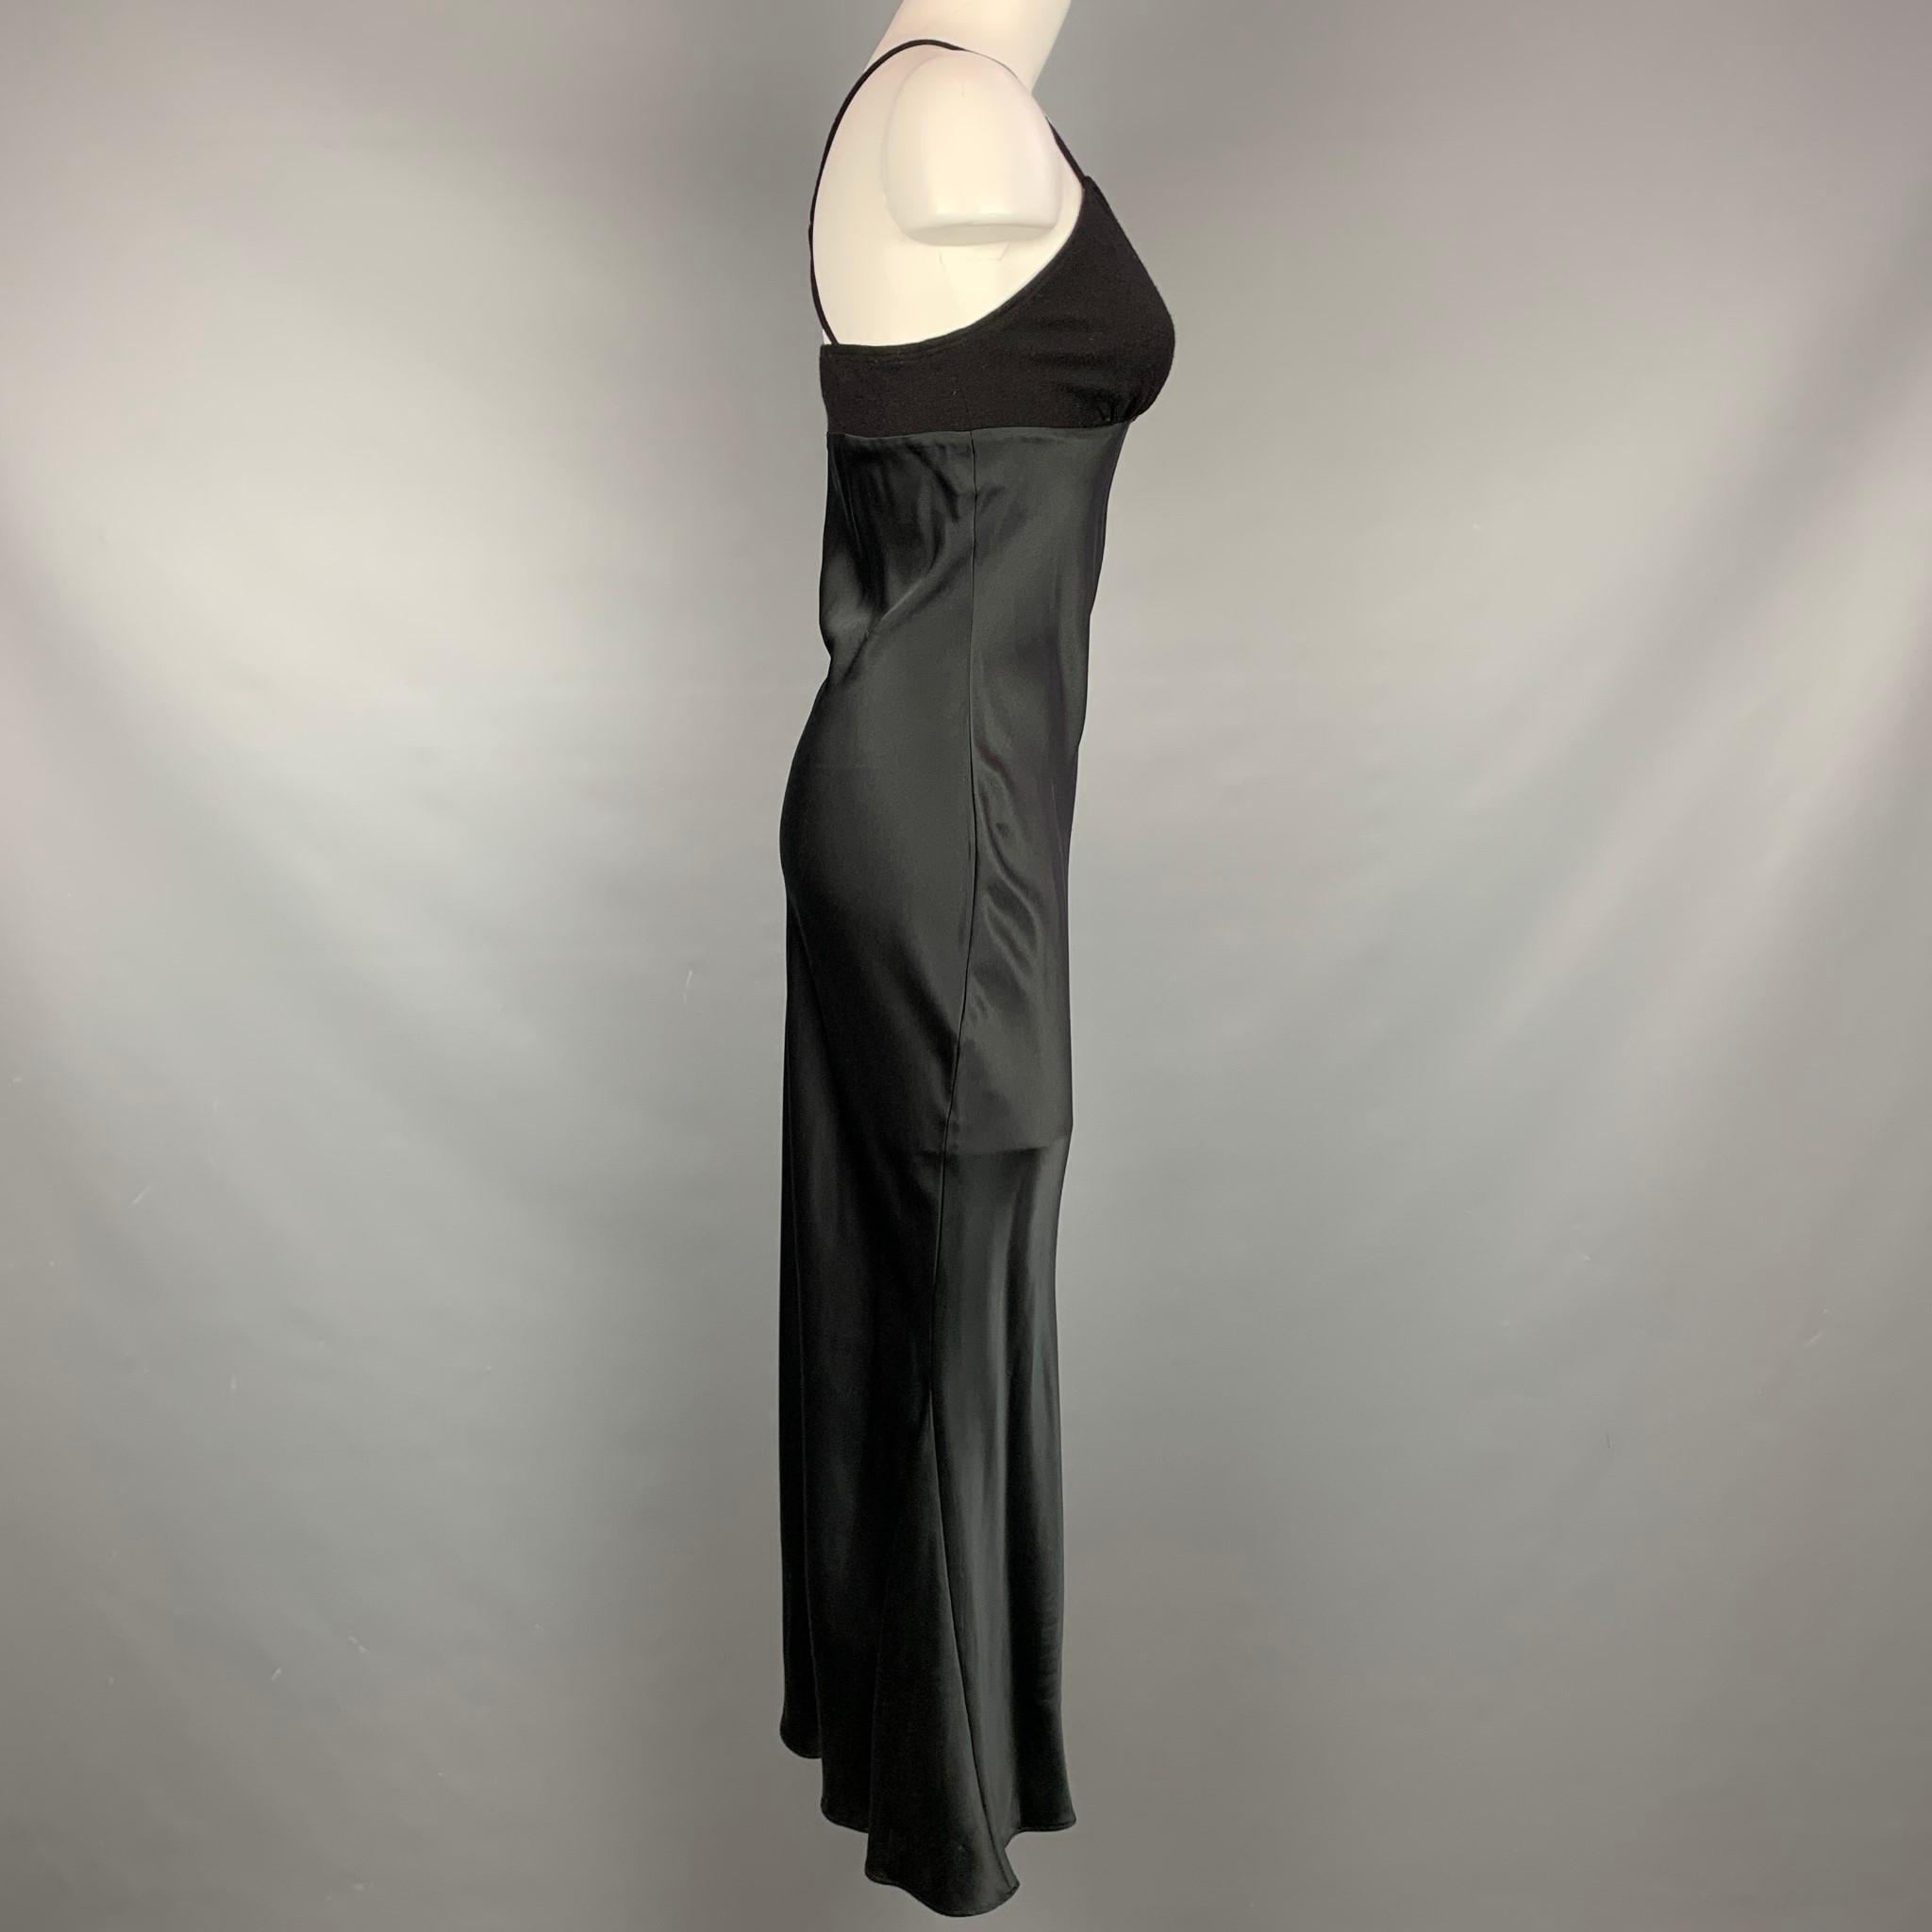 HEIDI WEISEL long dress comes in a black satin silk featuring a knitted top and spaghetti straps. 

Very Good Pre-Owned Condition.
Marked: 4

Measurements:

Bust: 26 in.
Waist: 28 in.
Hip: 32 in.
Length: 47 in. 